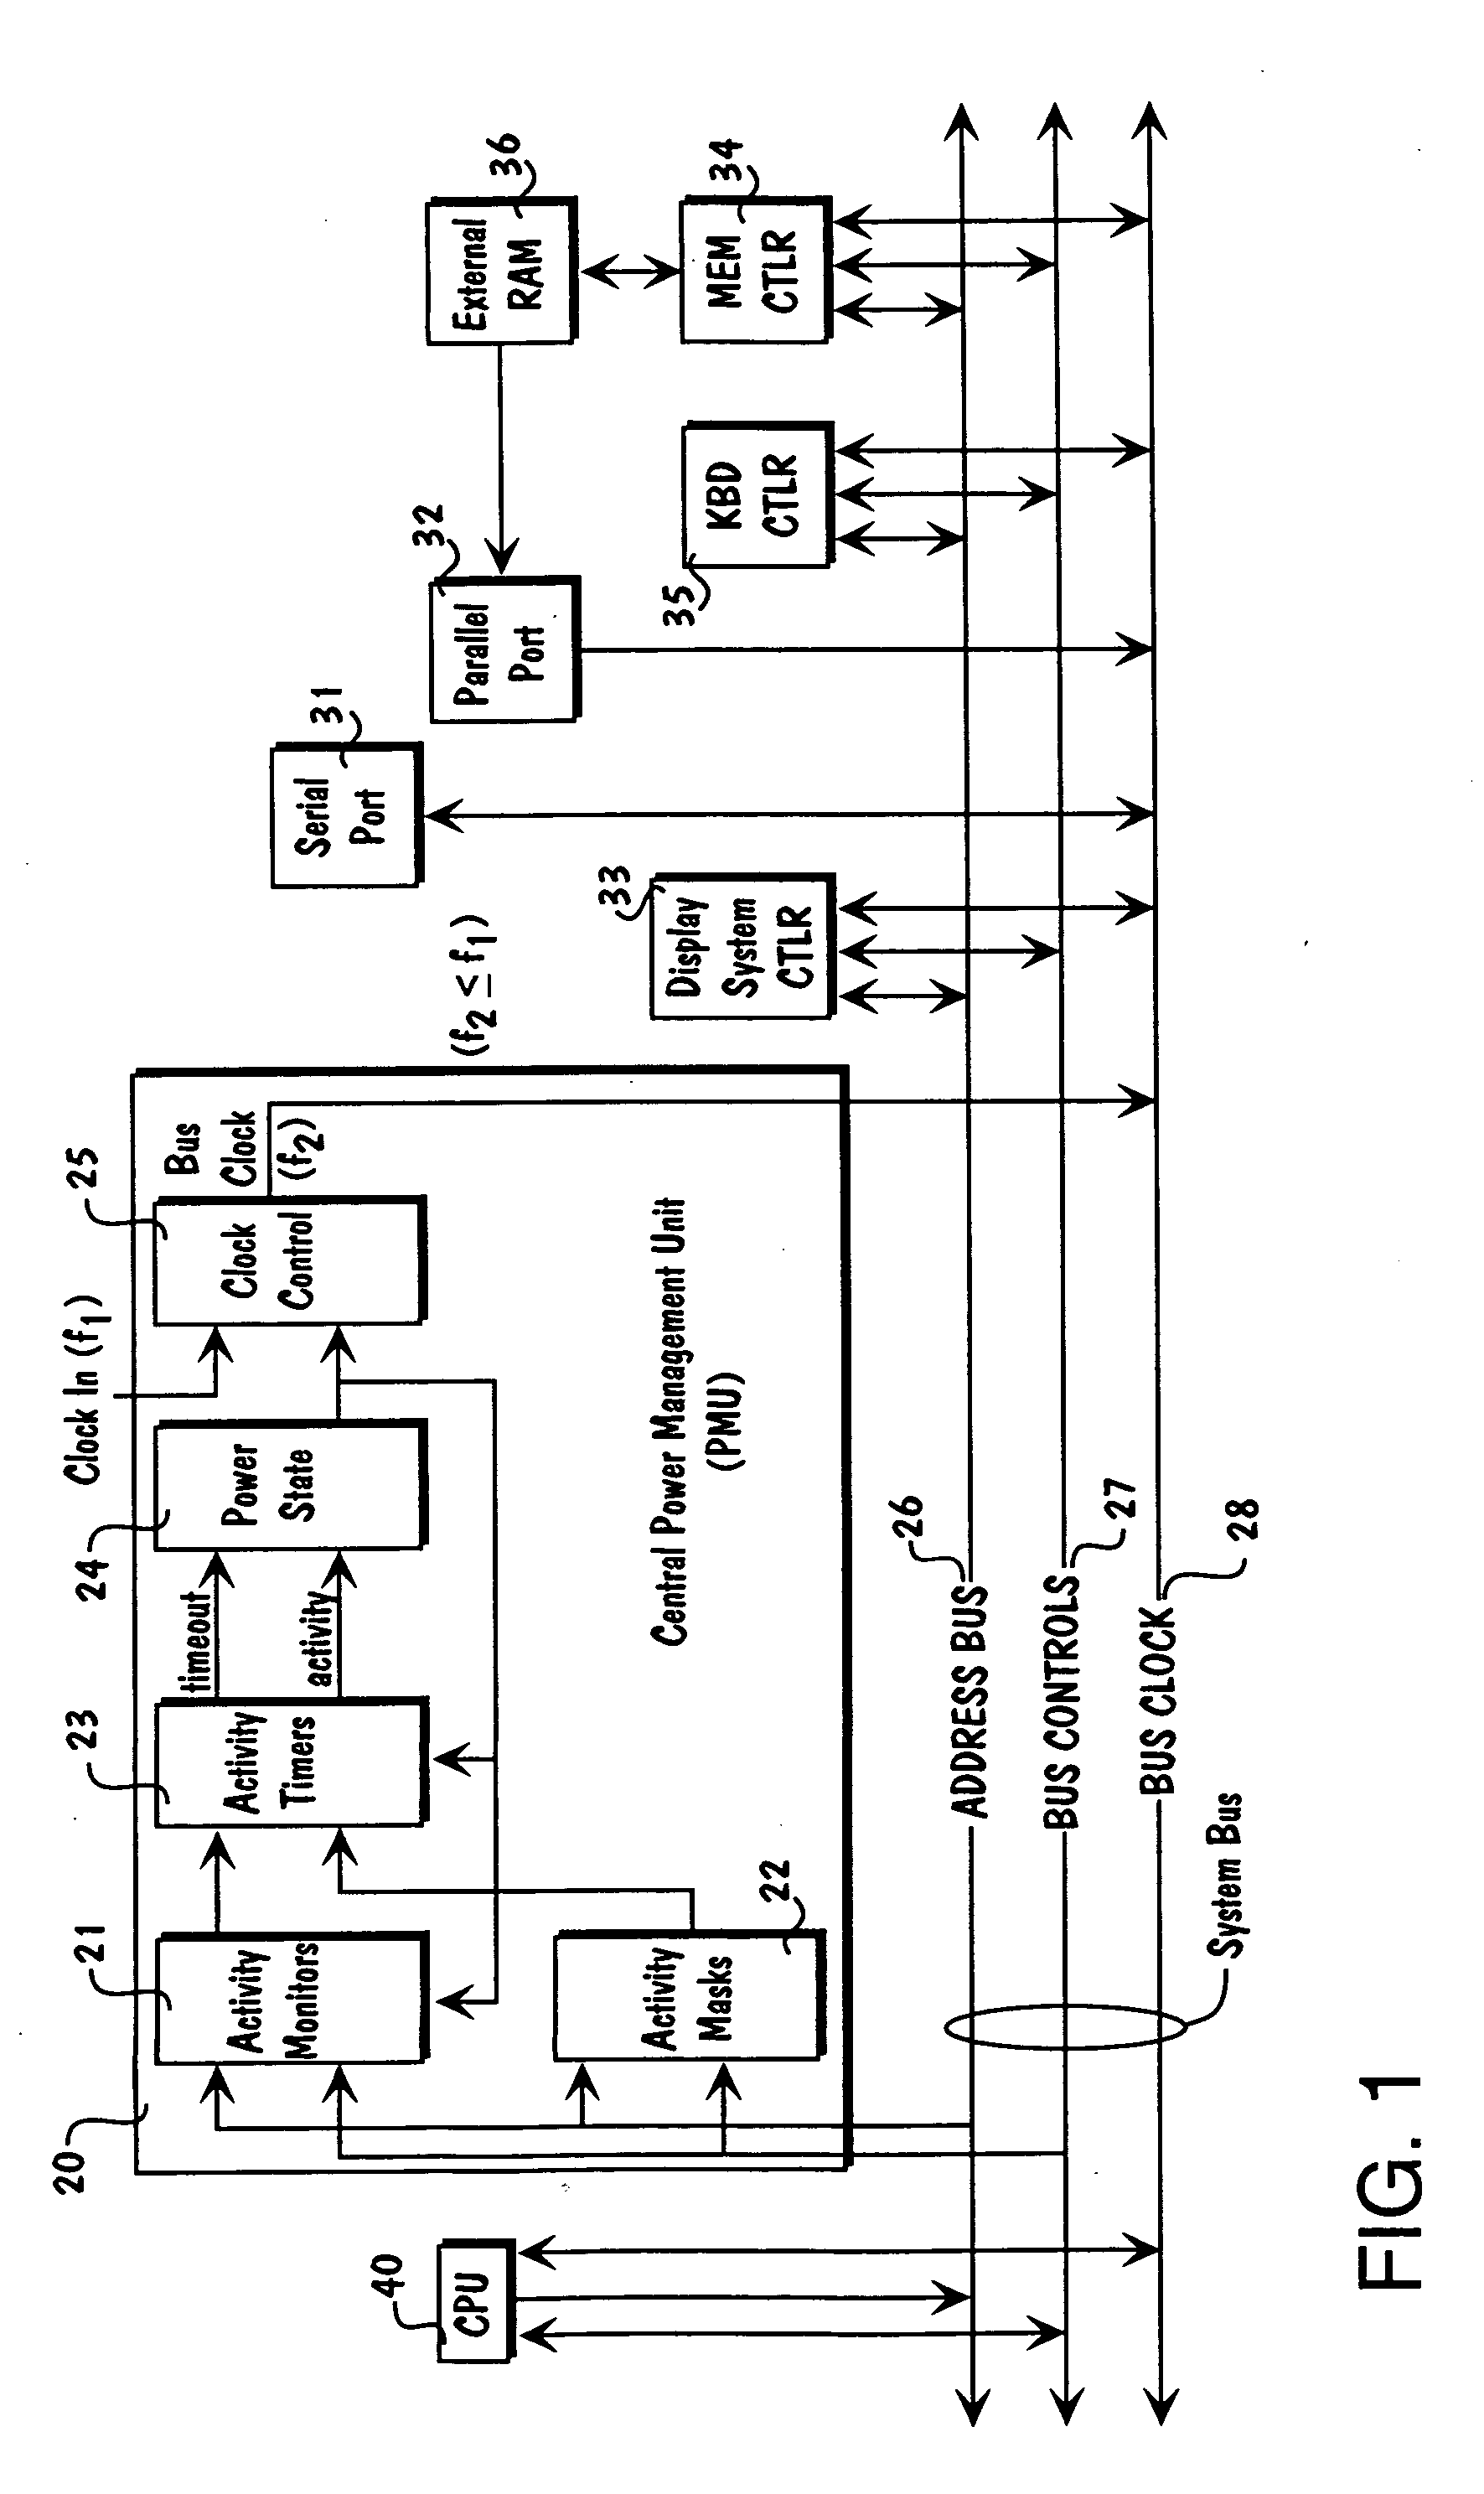 Method for modular design of a computer system-on-a-chip